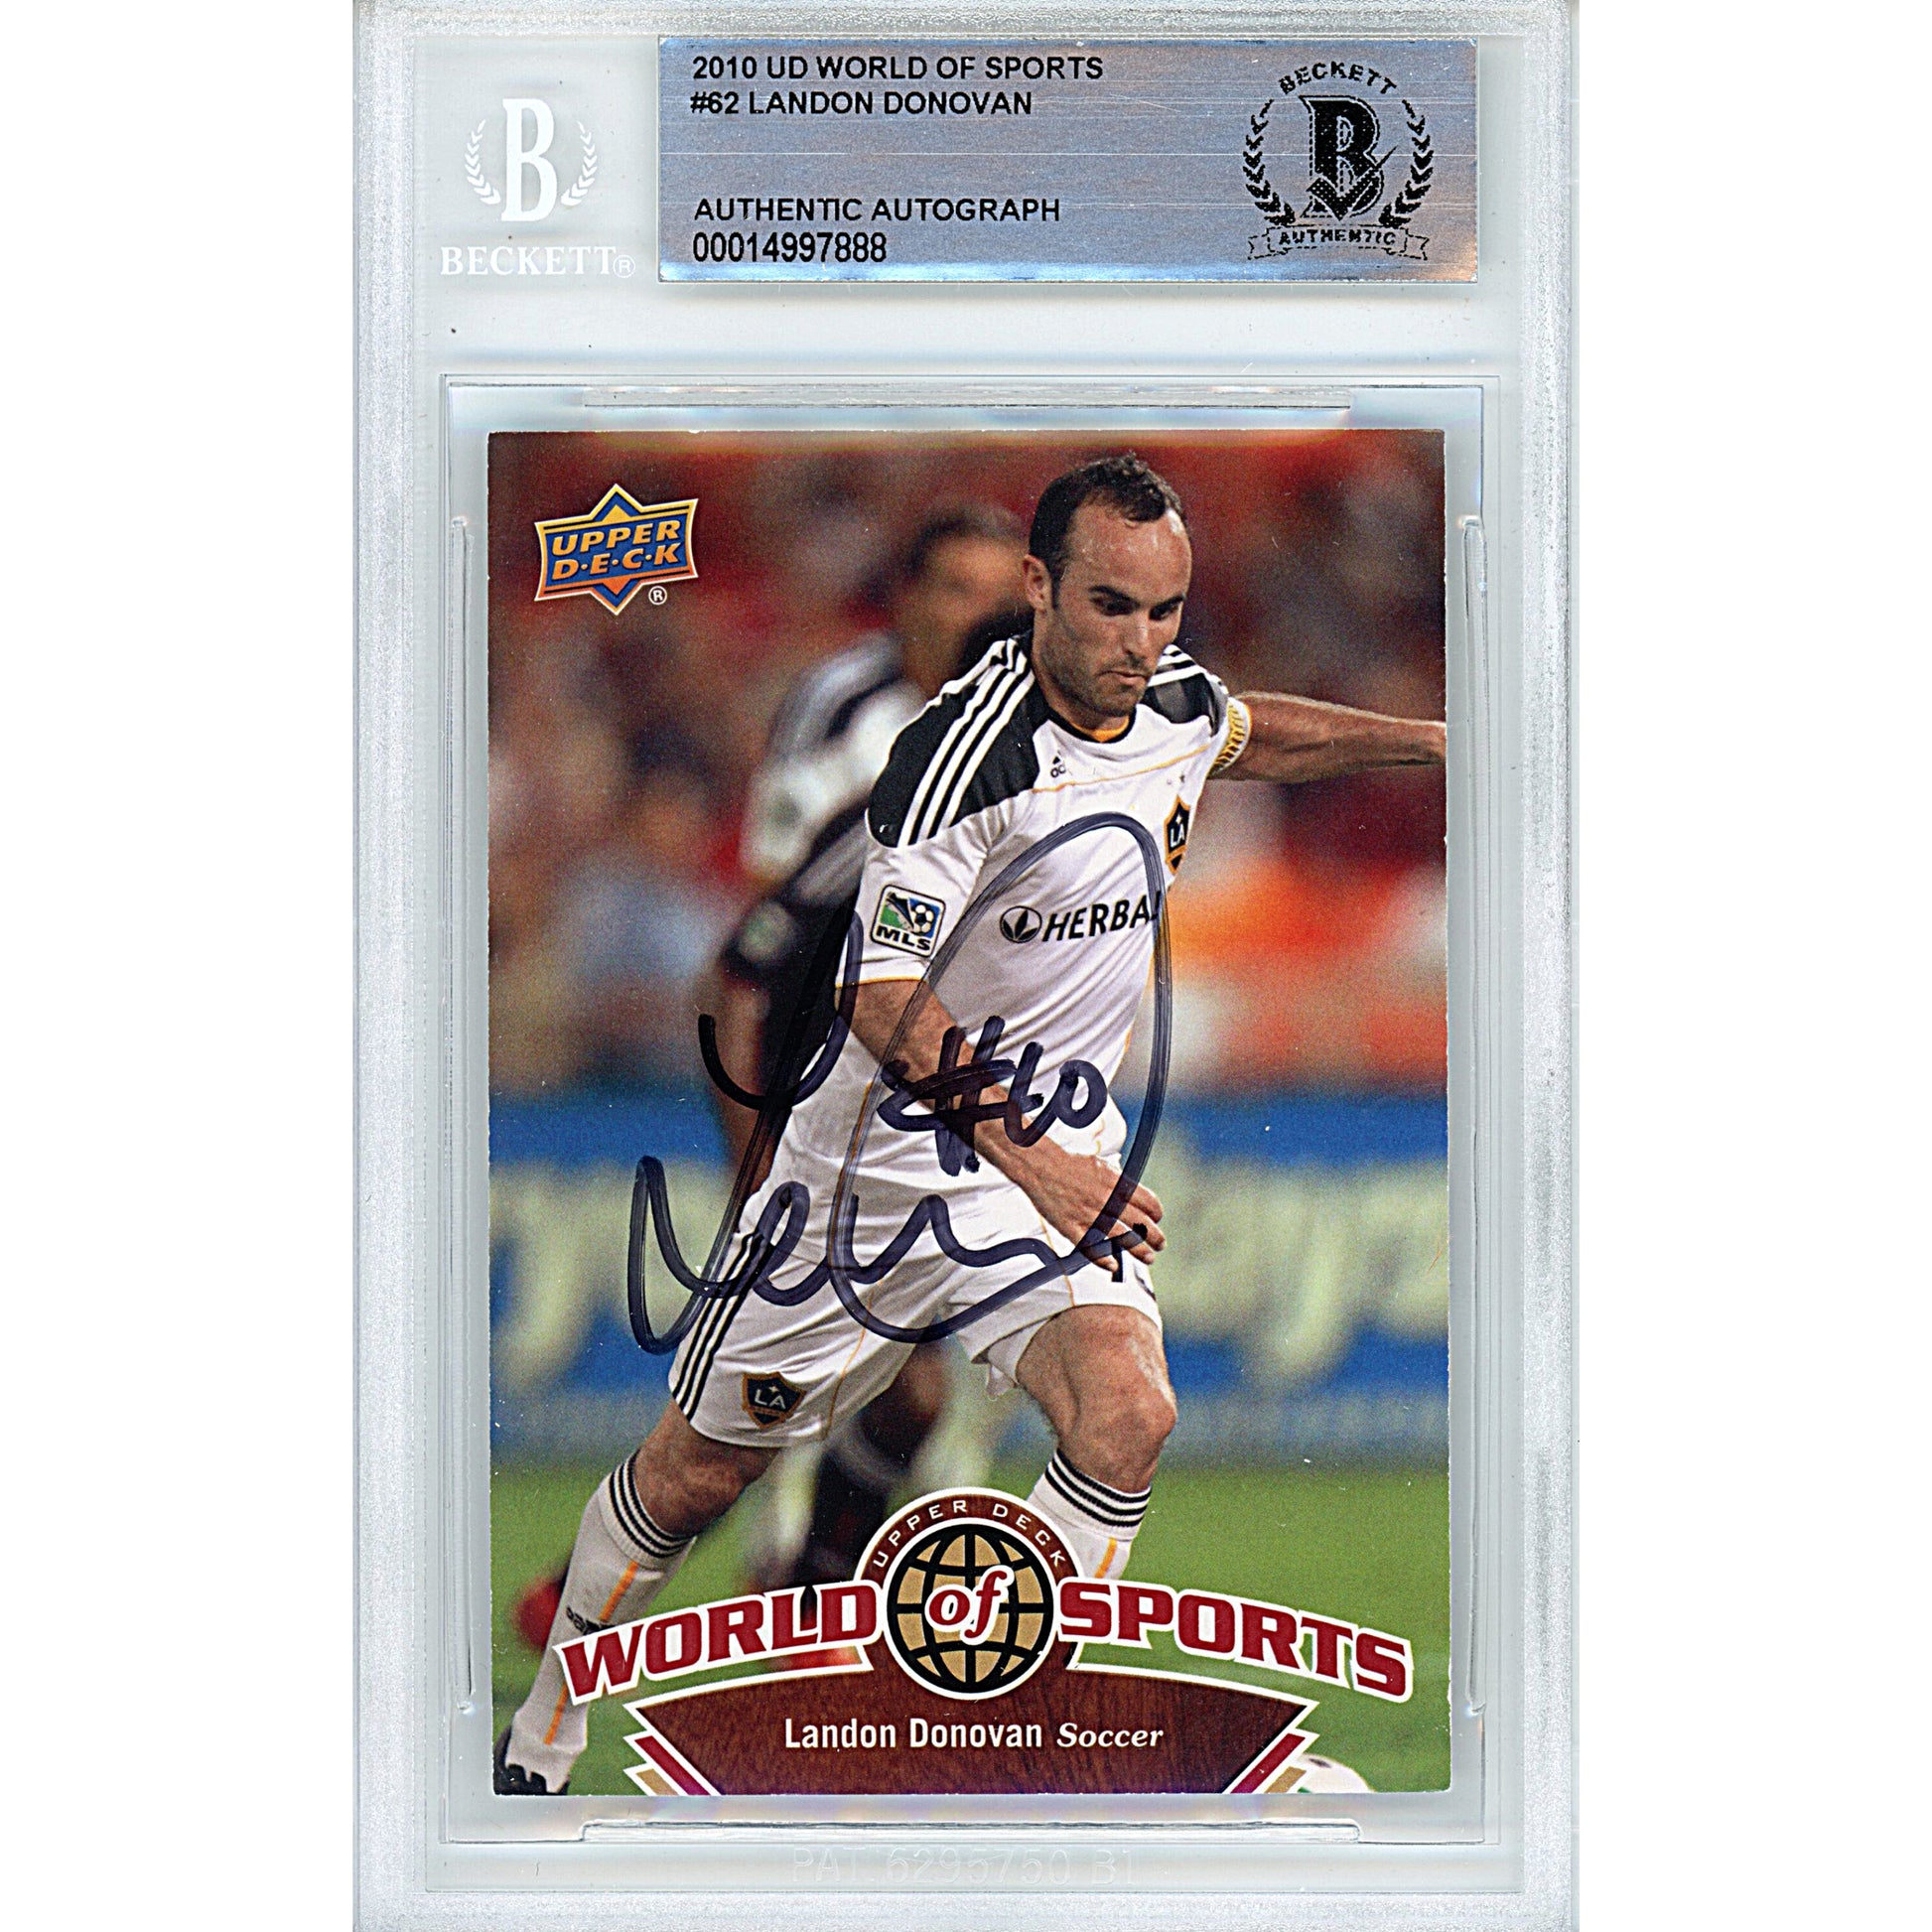 Soccer- Autographed- Landon Donovan Signed Los Angeles Galaxy 2010 Upper Deck World of Sports Football Card Beckett Authentication Slabbed 00014997888 - 101